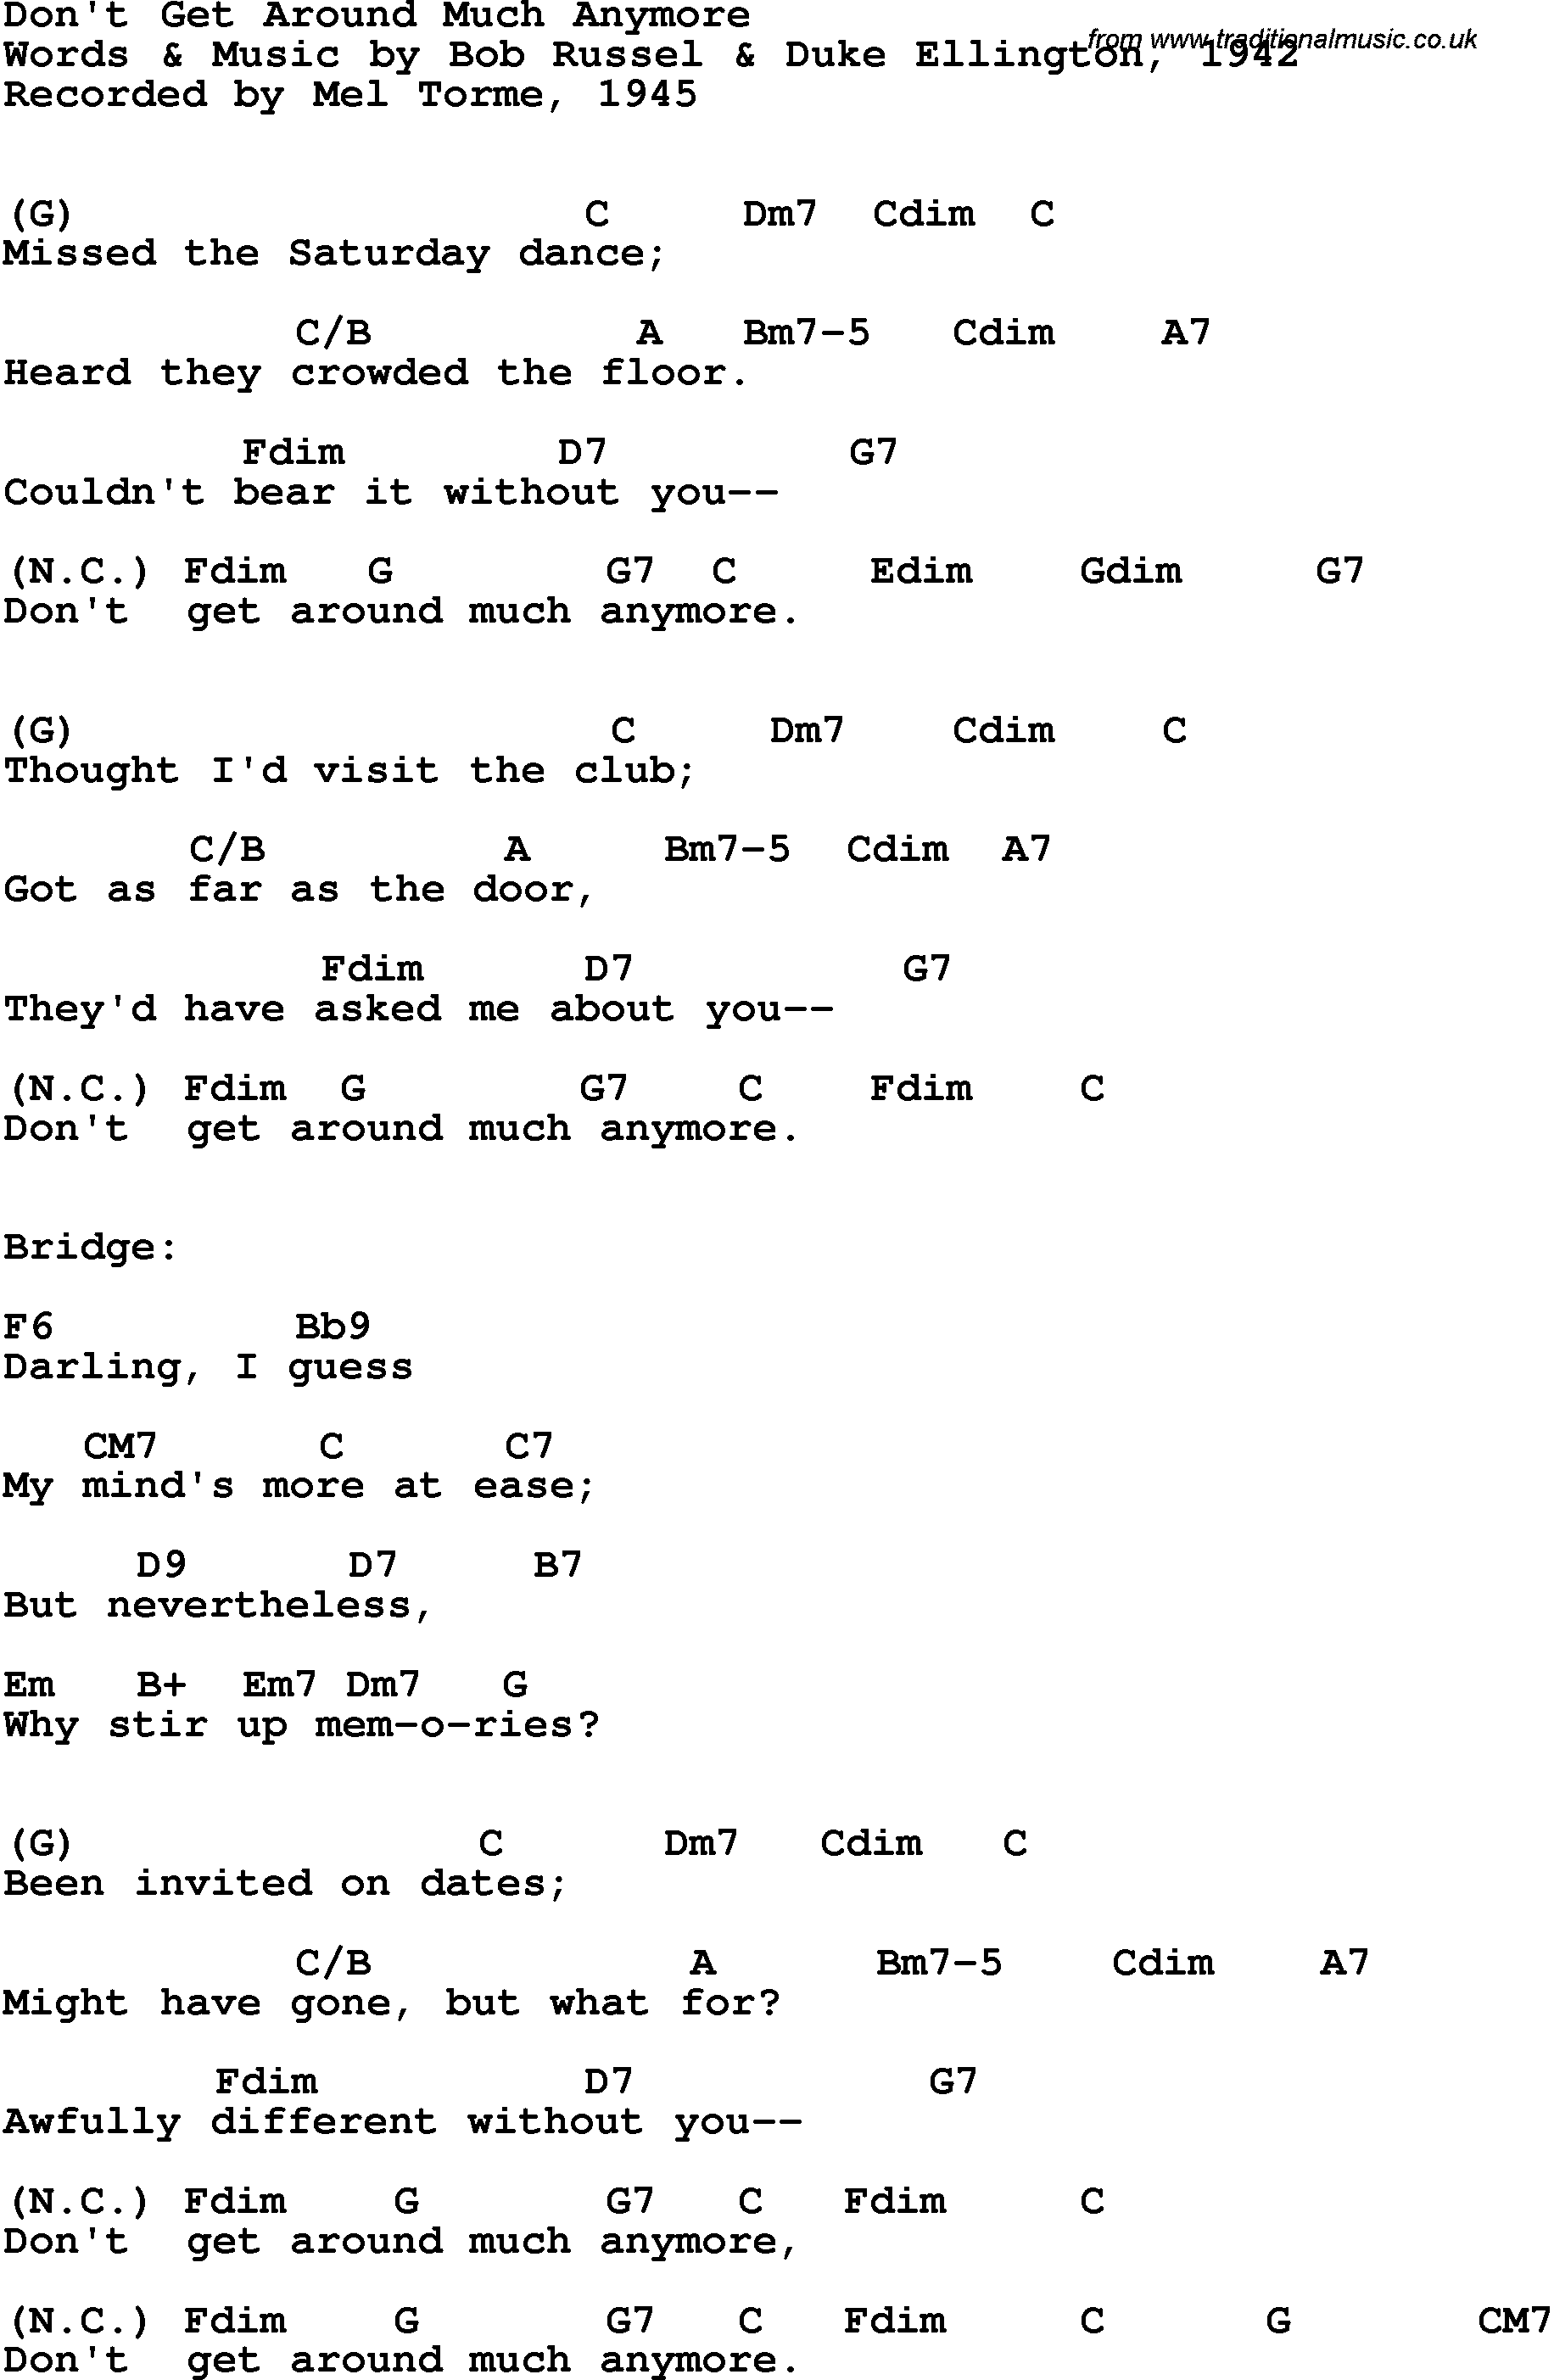 Song Lyrics with guitar chords for Don't Get Around Much Anymore - Mel Torme, 1945